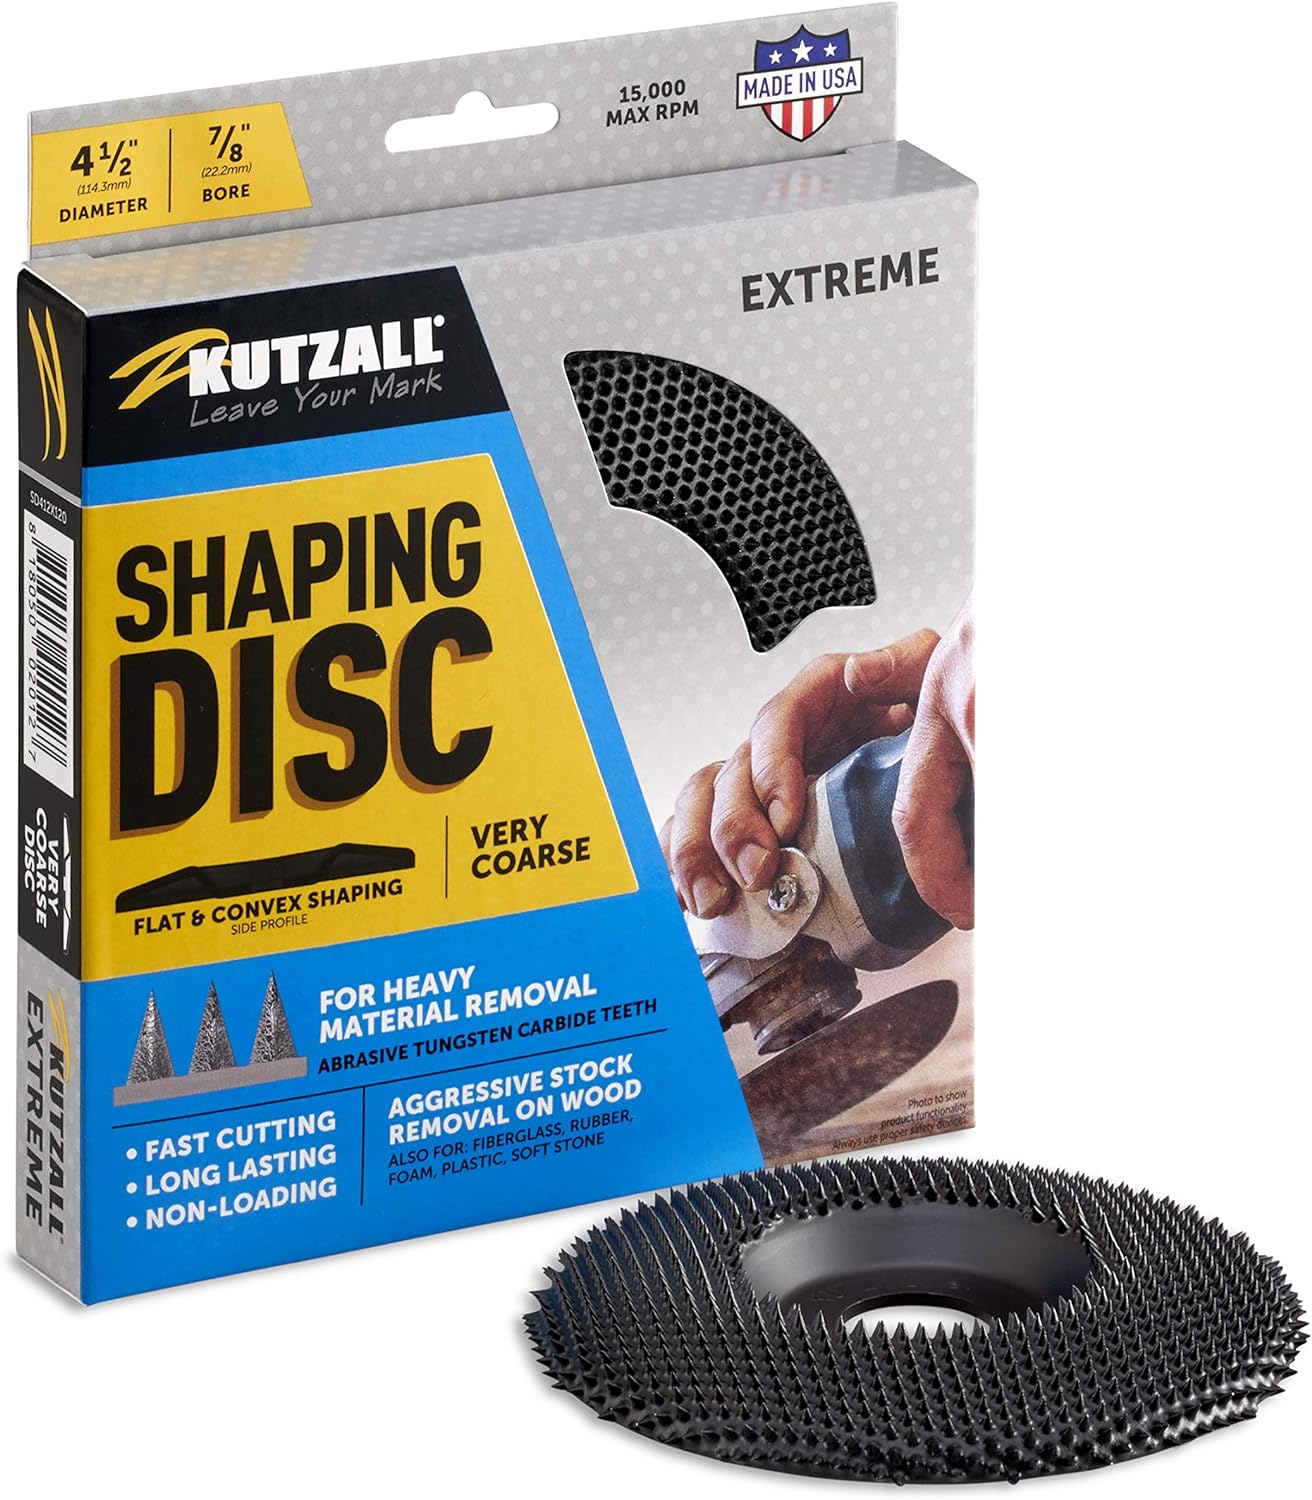 Kutzall Extreme Shaping Disc - Very Coarse, 4-1⁄2 (114.3mm) Dia. X 7⁄8 (22.2mm) Bore - Woodworking Angle Grinder Attachment for DeWalt, Bosch, Milwaukee, Makita. Abrasive Tungsten Carbide, SD412X120